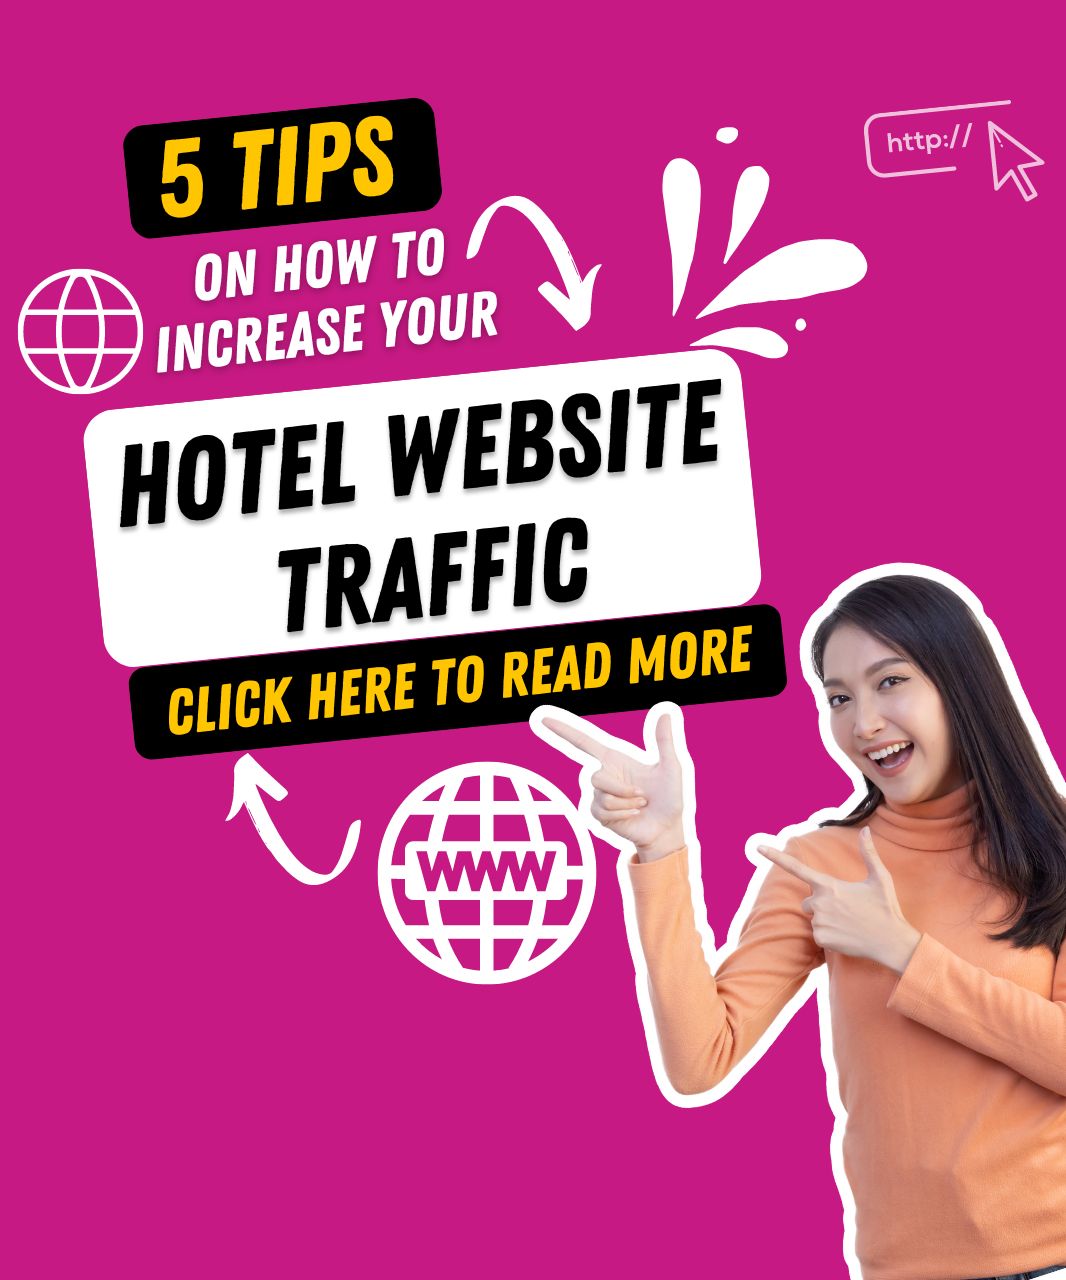 5 Tips on How To Increase Your Hotel Website Traffic